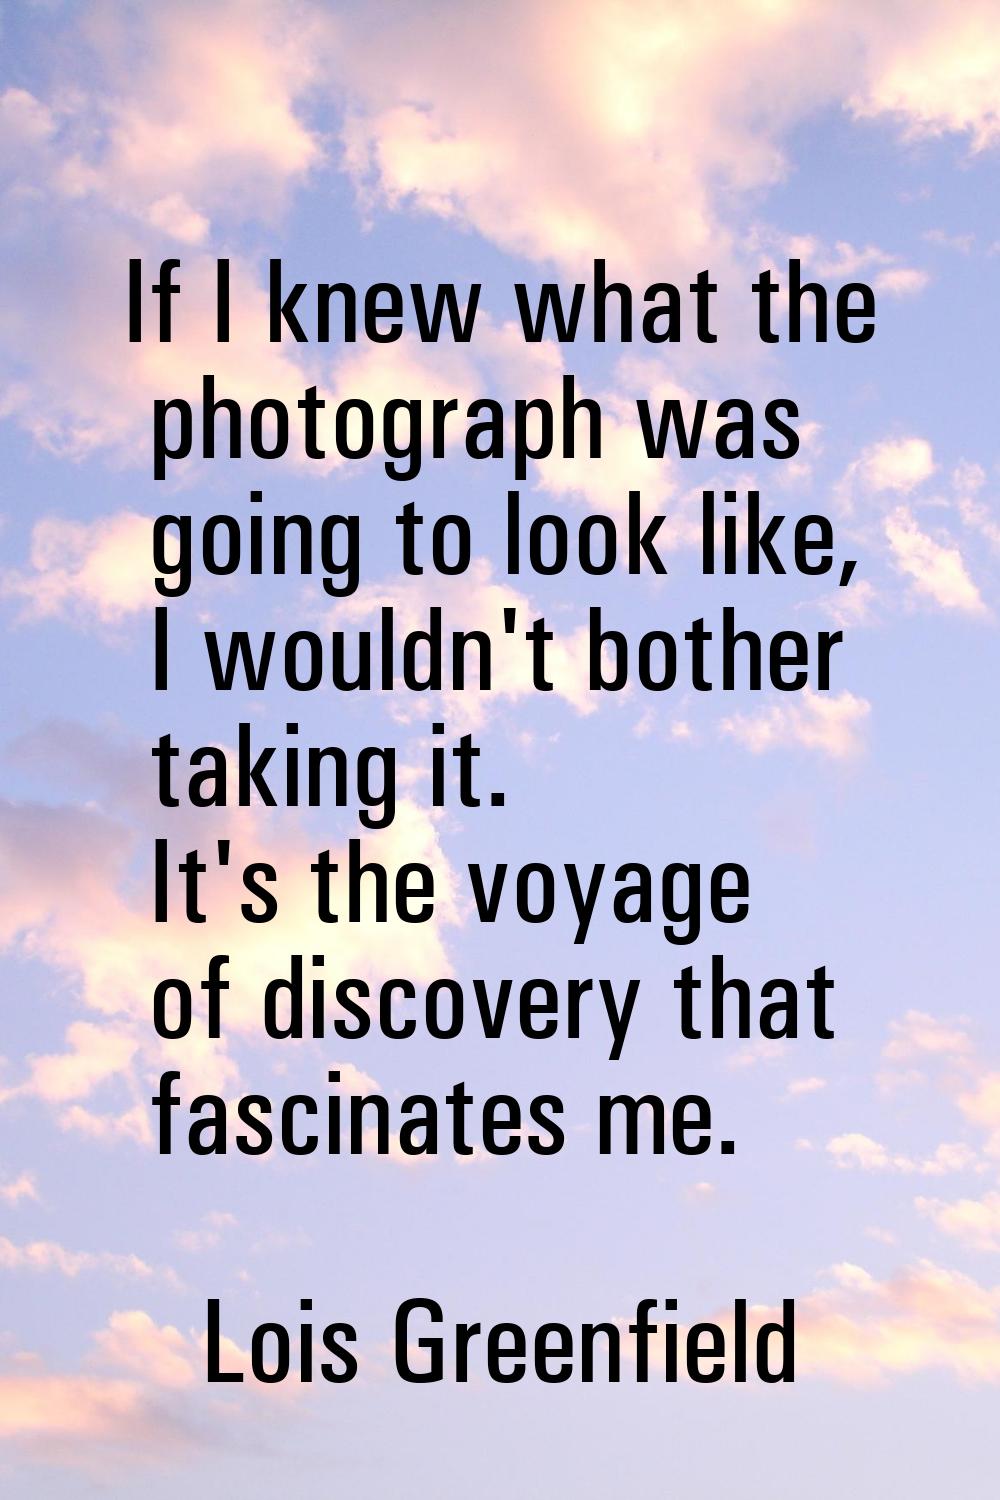 If I knew what the photograph was going to look like, I wouldn't bother taking it. It's the voyage 